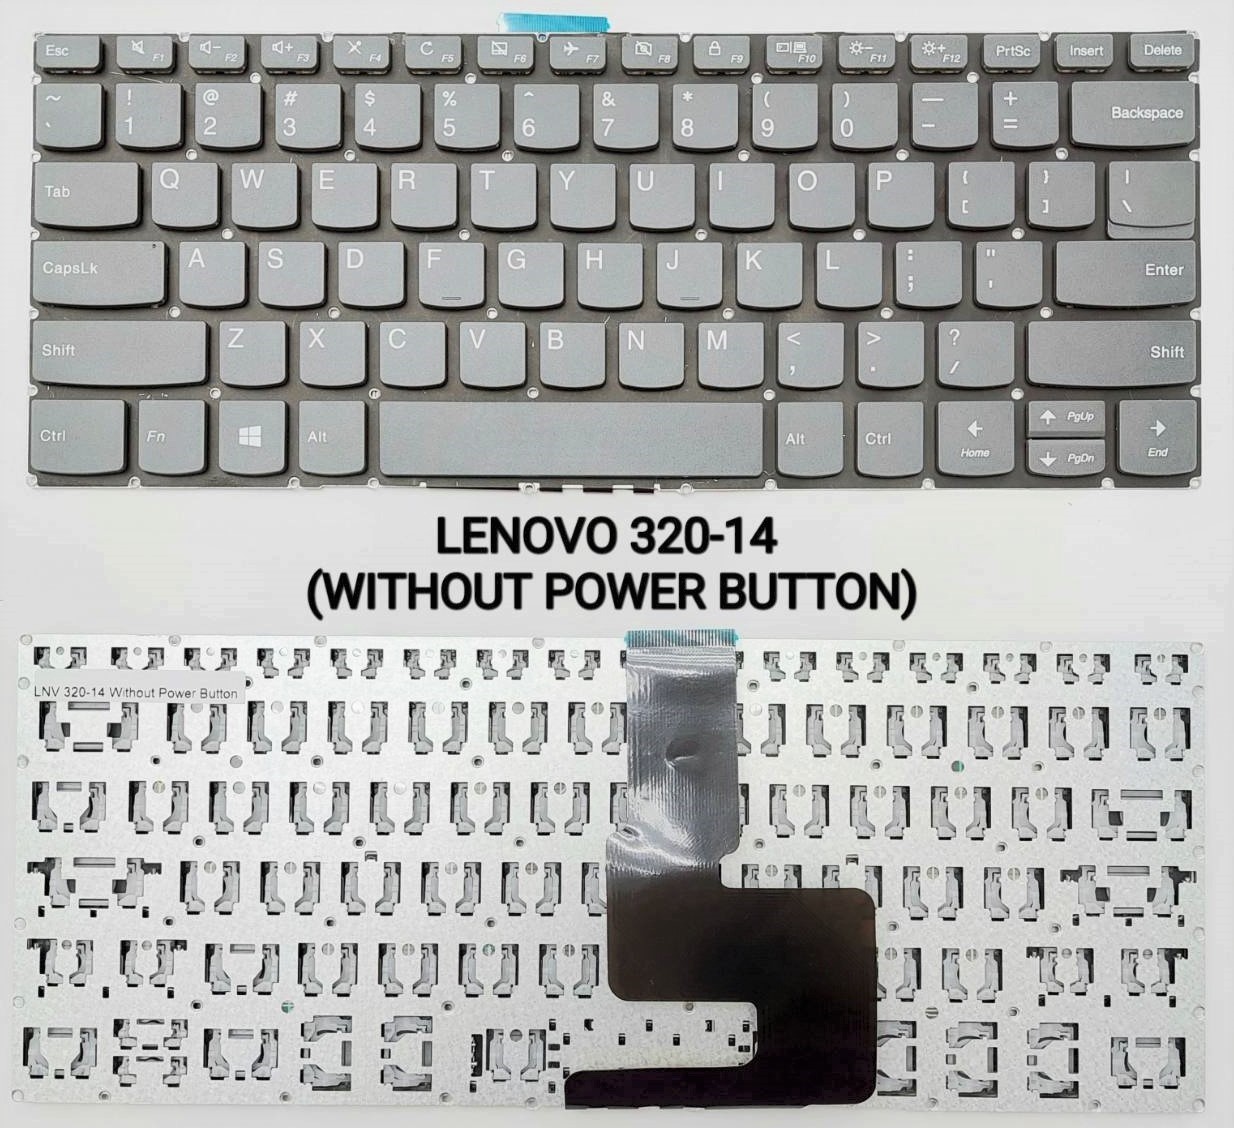 LENOVO 320-14 KEYBOARD (WITHOUT POWER BUTTON)